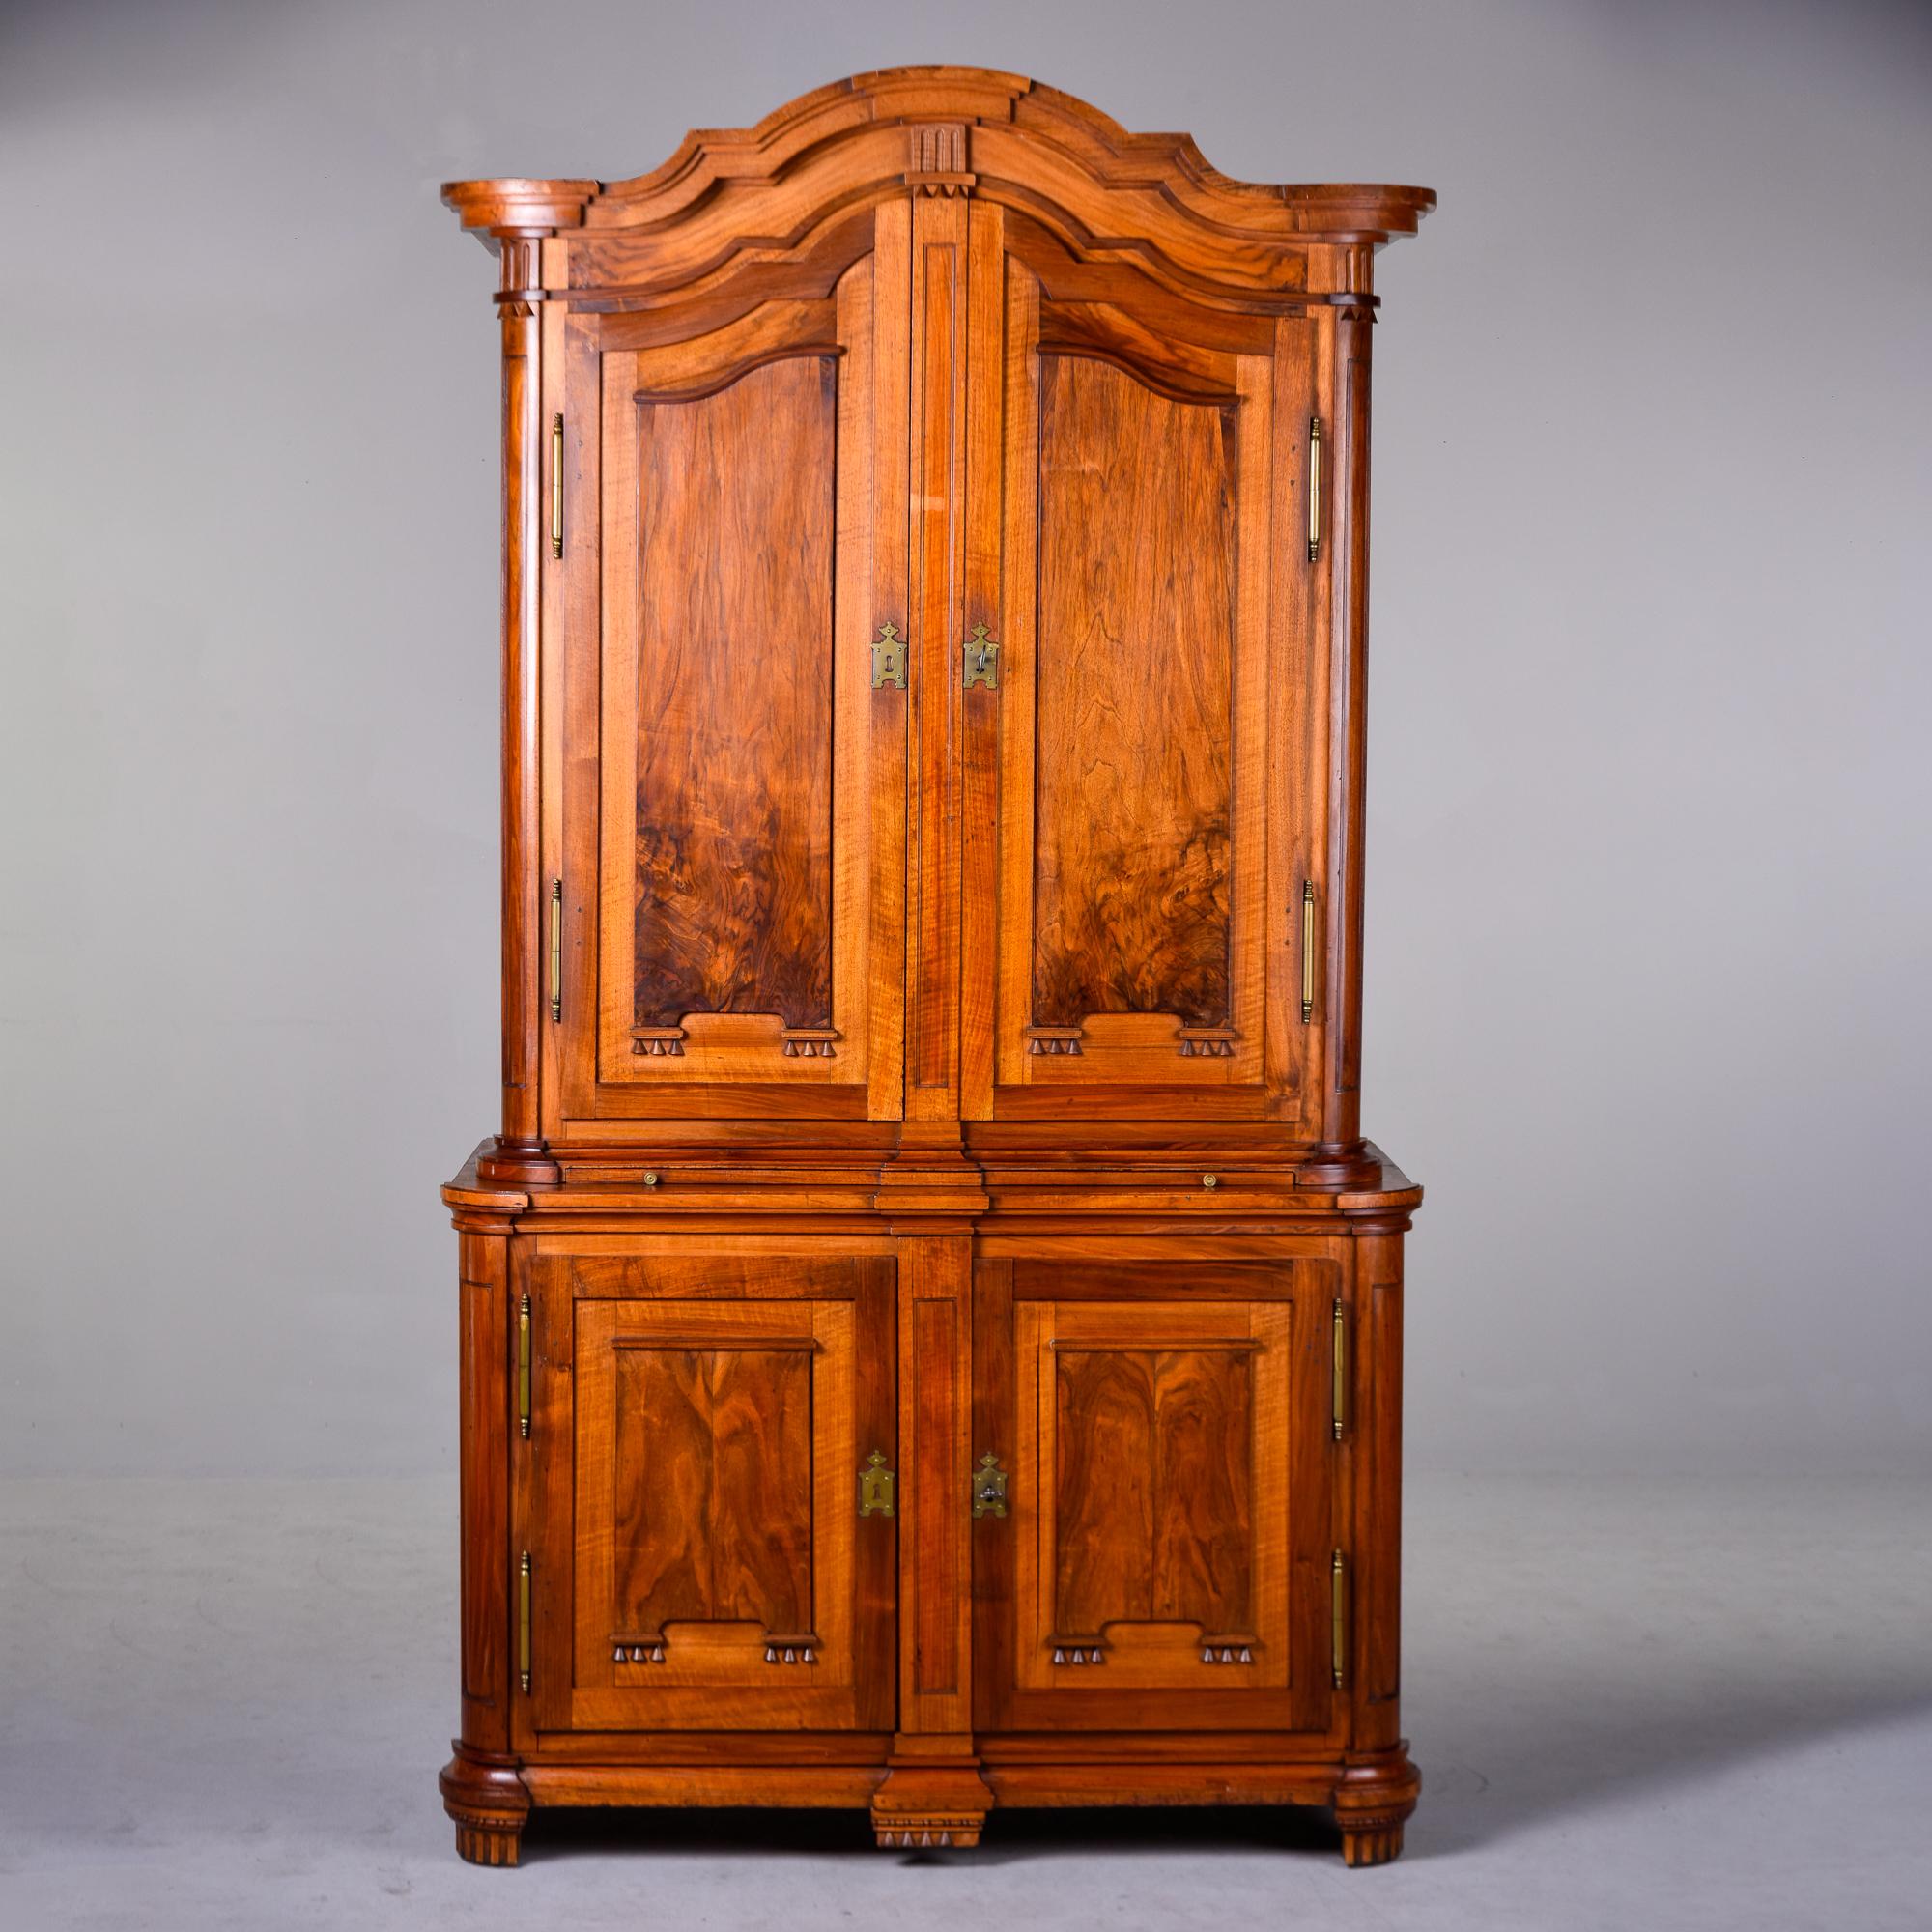 Found in France, this two piece walnut cupboard dates from the 1880s. Walnut has a rich, warm patina and is accented with burlwood panels on door insets. Top piece has an arched pediment and two hinged doors with functional lock that open to storage